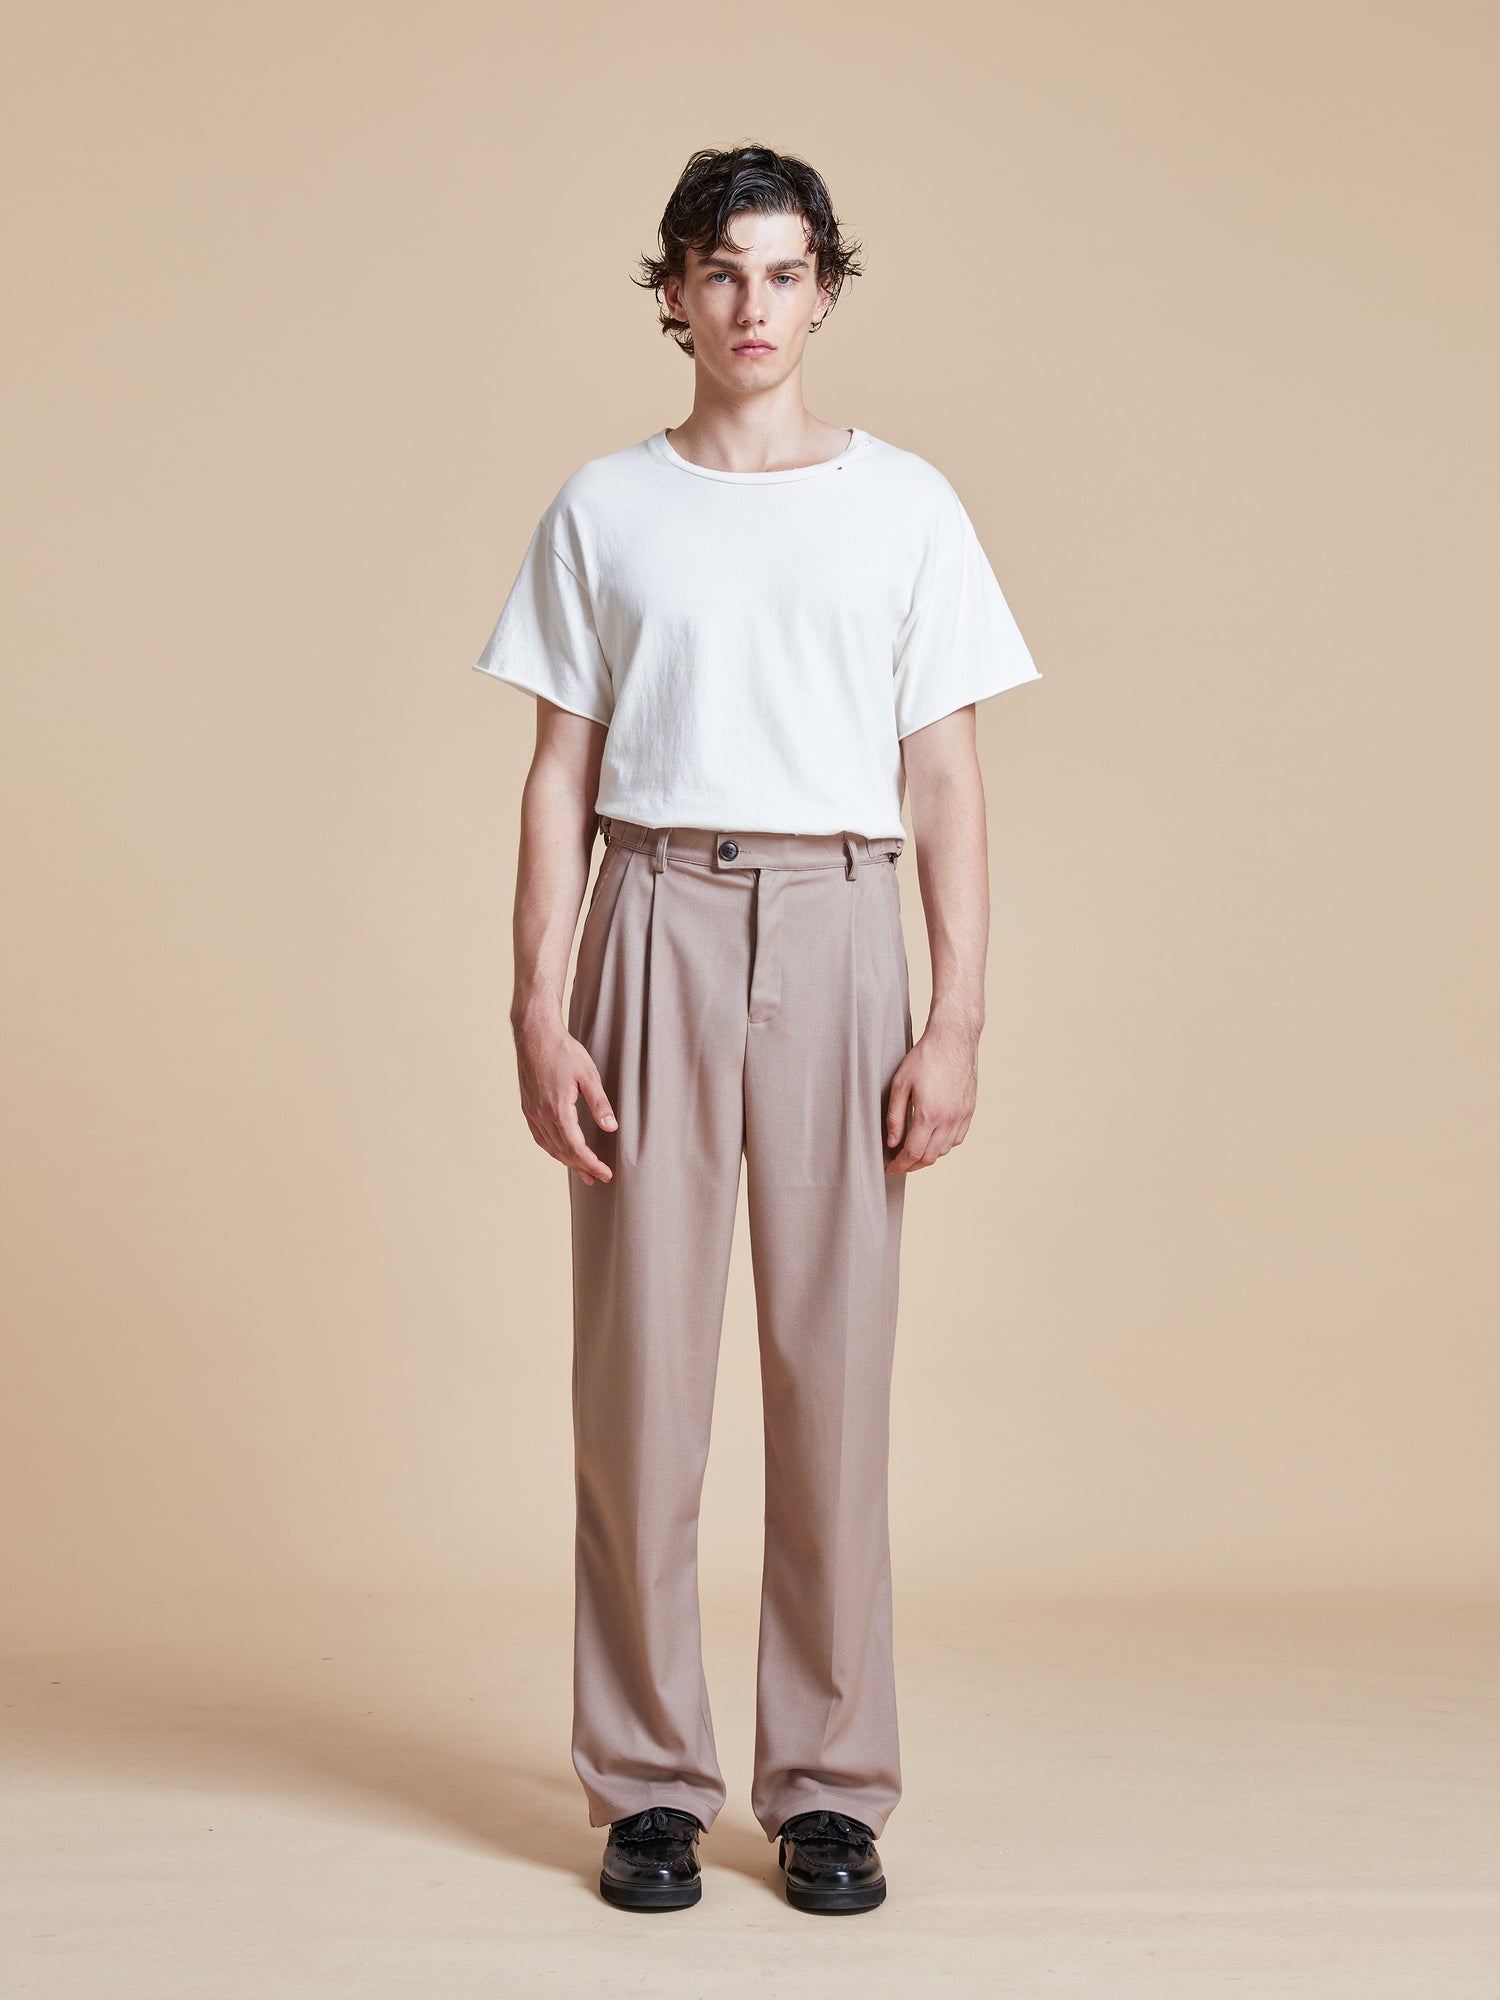 The model is wearing a white t - shirt and Found beige Pleated Trousers.